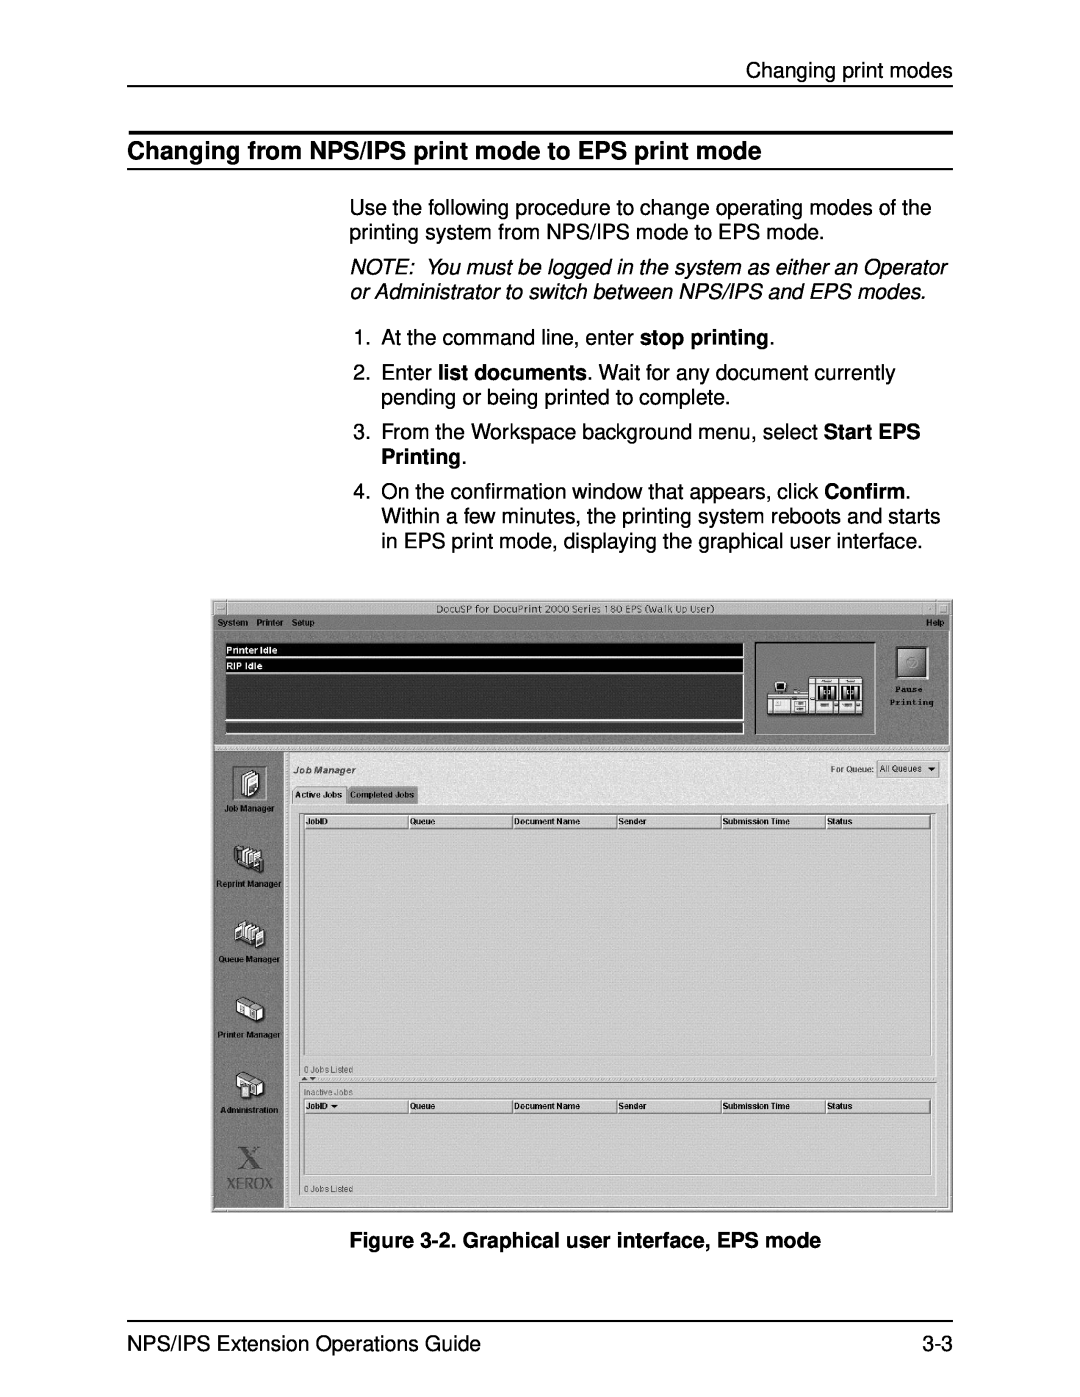 Xerox 2000 Series manual 2.Graphical user interface, EPS mode 